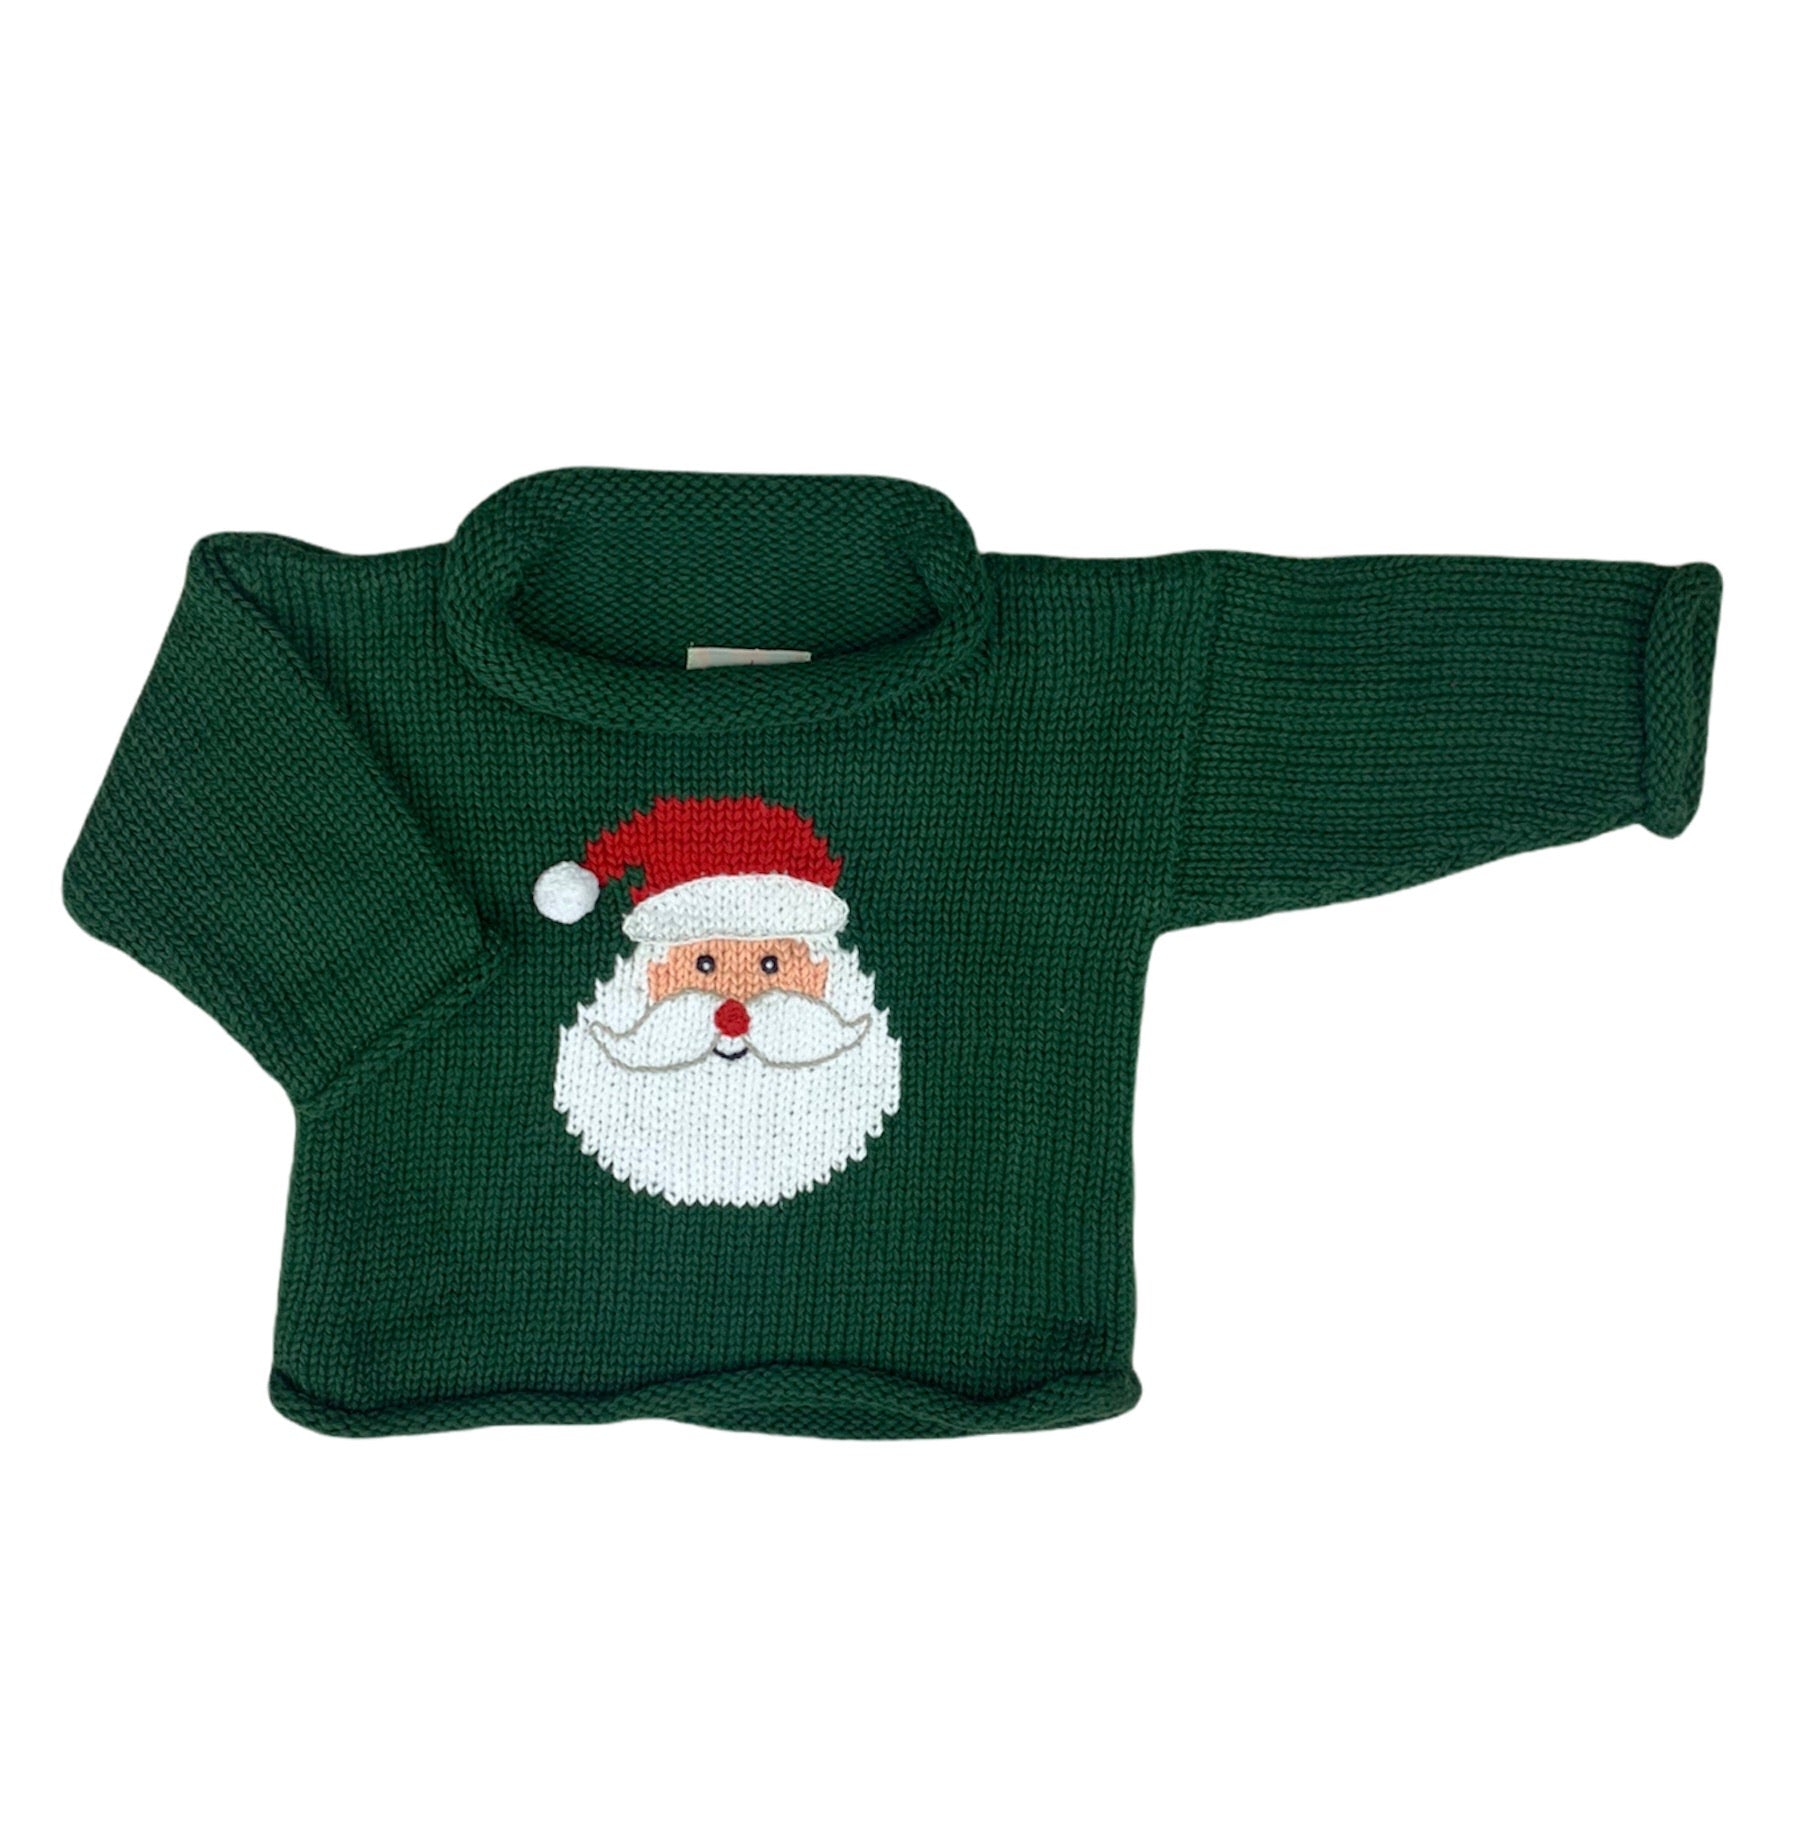 long sleeve green sweater with red and white santa face in center